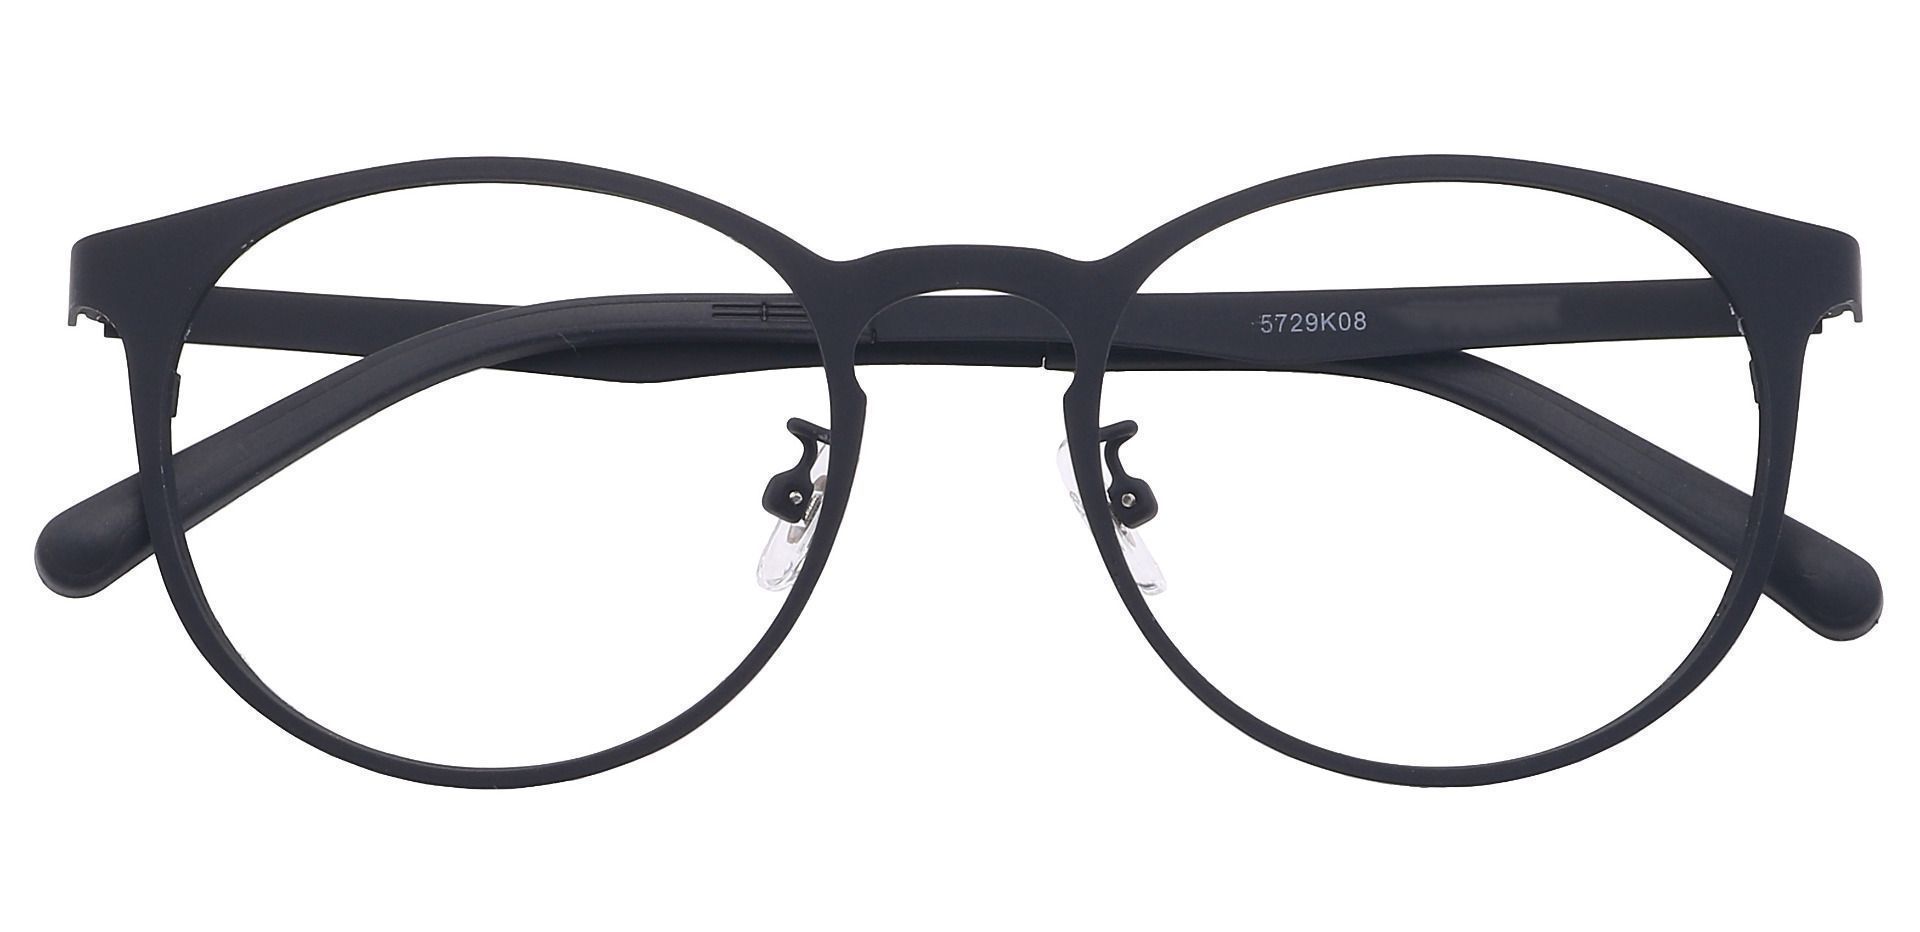 Wallace Oval Lined Bifocal Glasses - Black